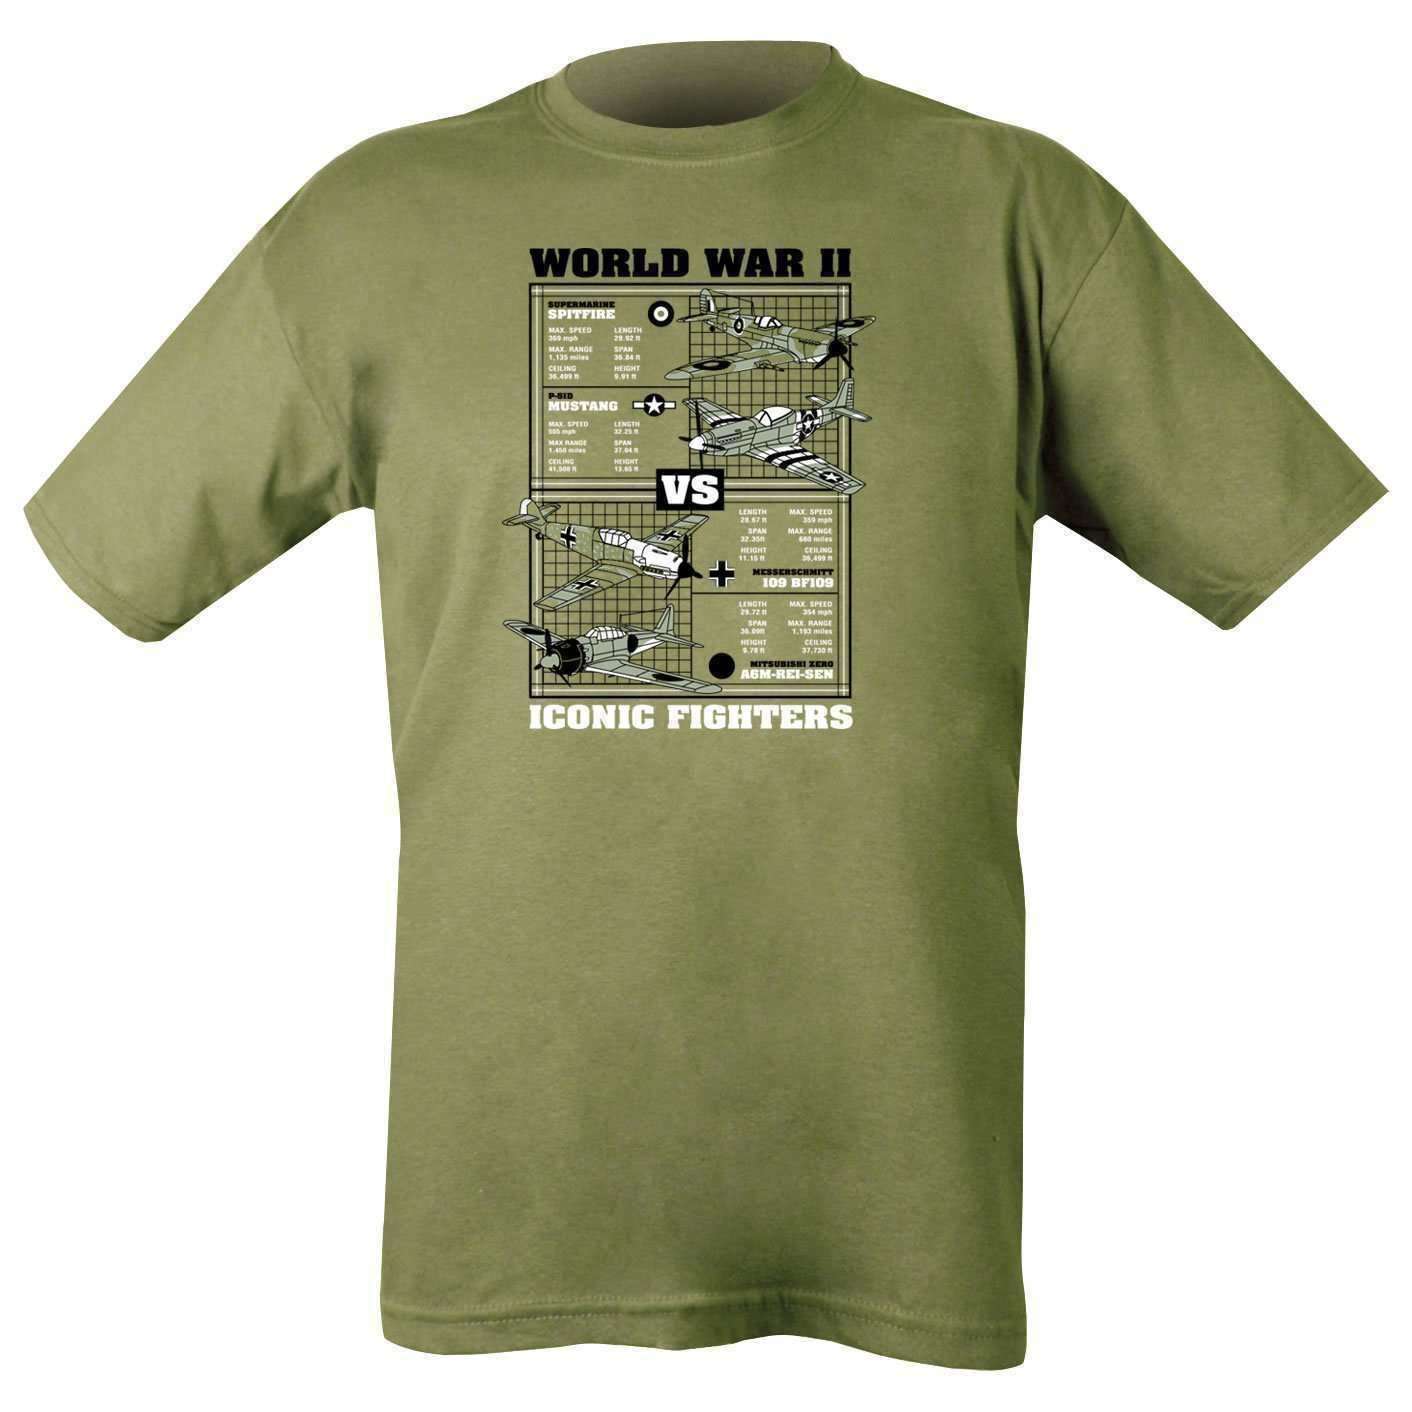 Kombat UK, WWII Iconic Fighters T-shirt - Olive Green, T-Shirts, Shirts & Vests, Wylies Outdoor World,